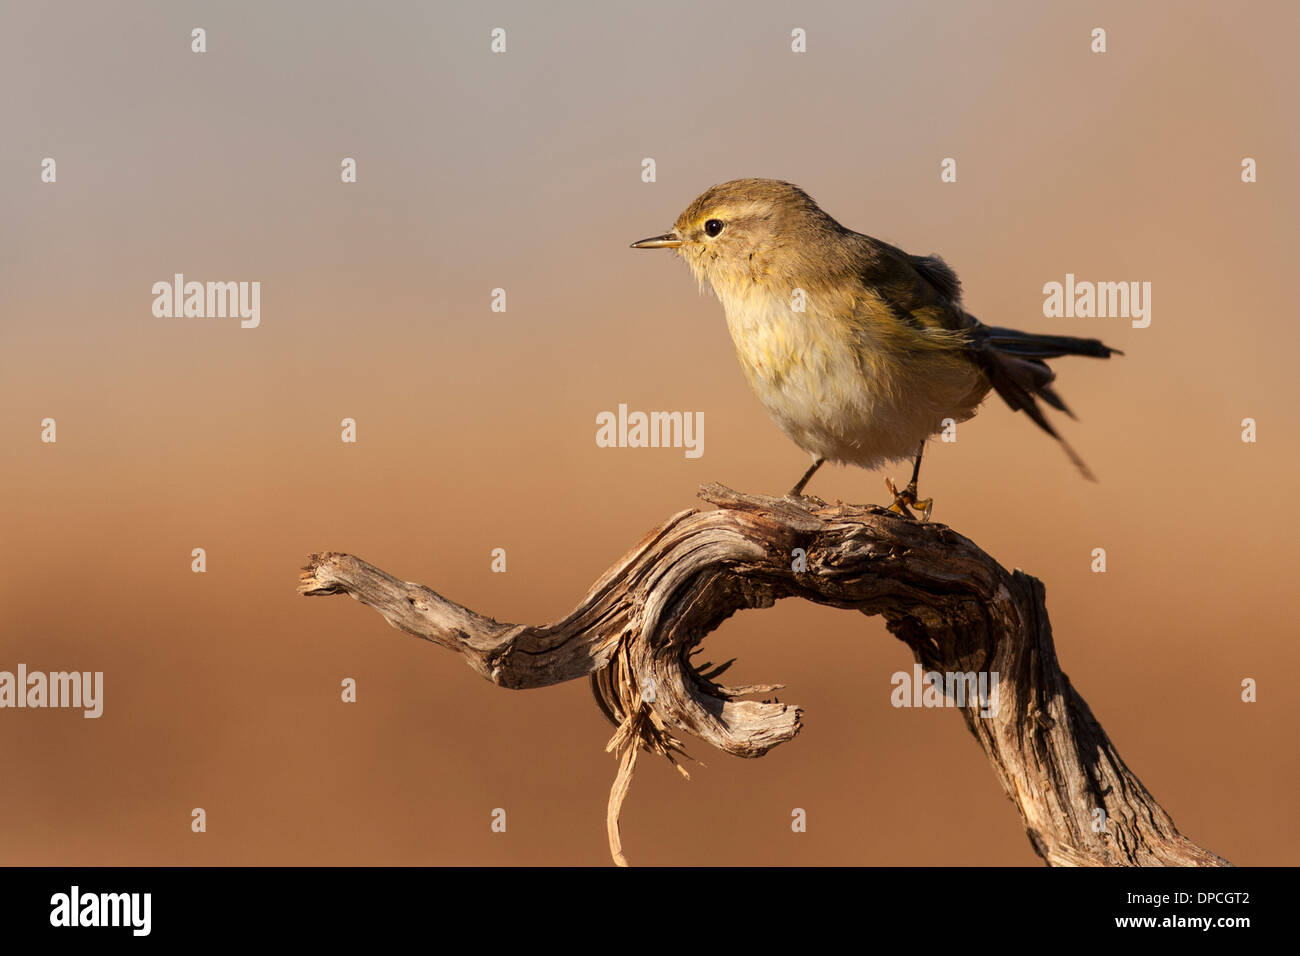 Adult Willow Warbler (Phylloscopus trochilus) perched on a tree. Photographed in Ein Afek Nature Reserve, Israel in October Stock Photo